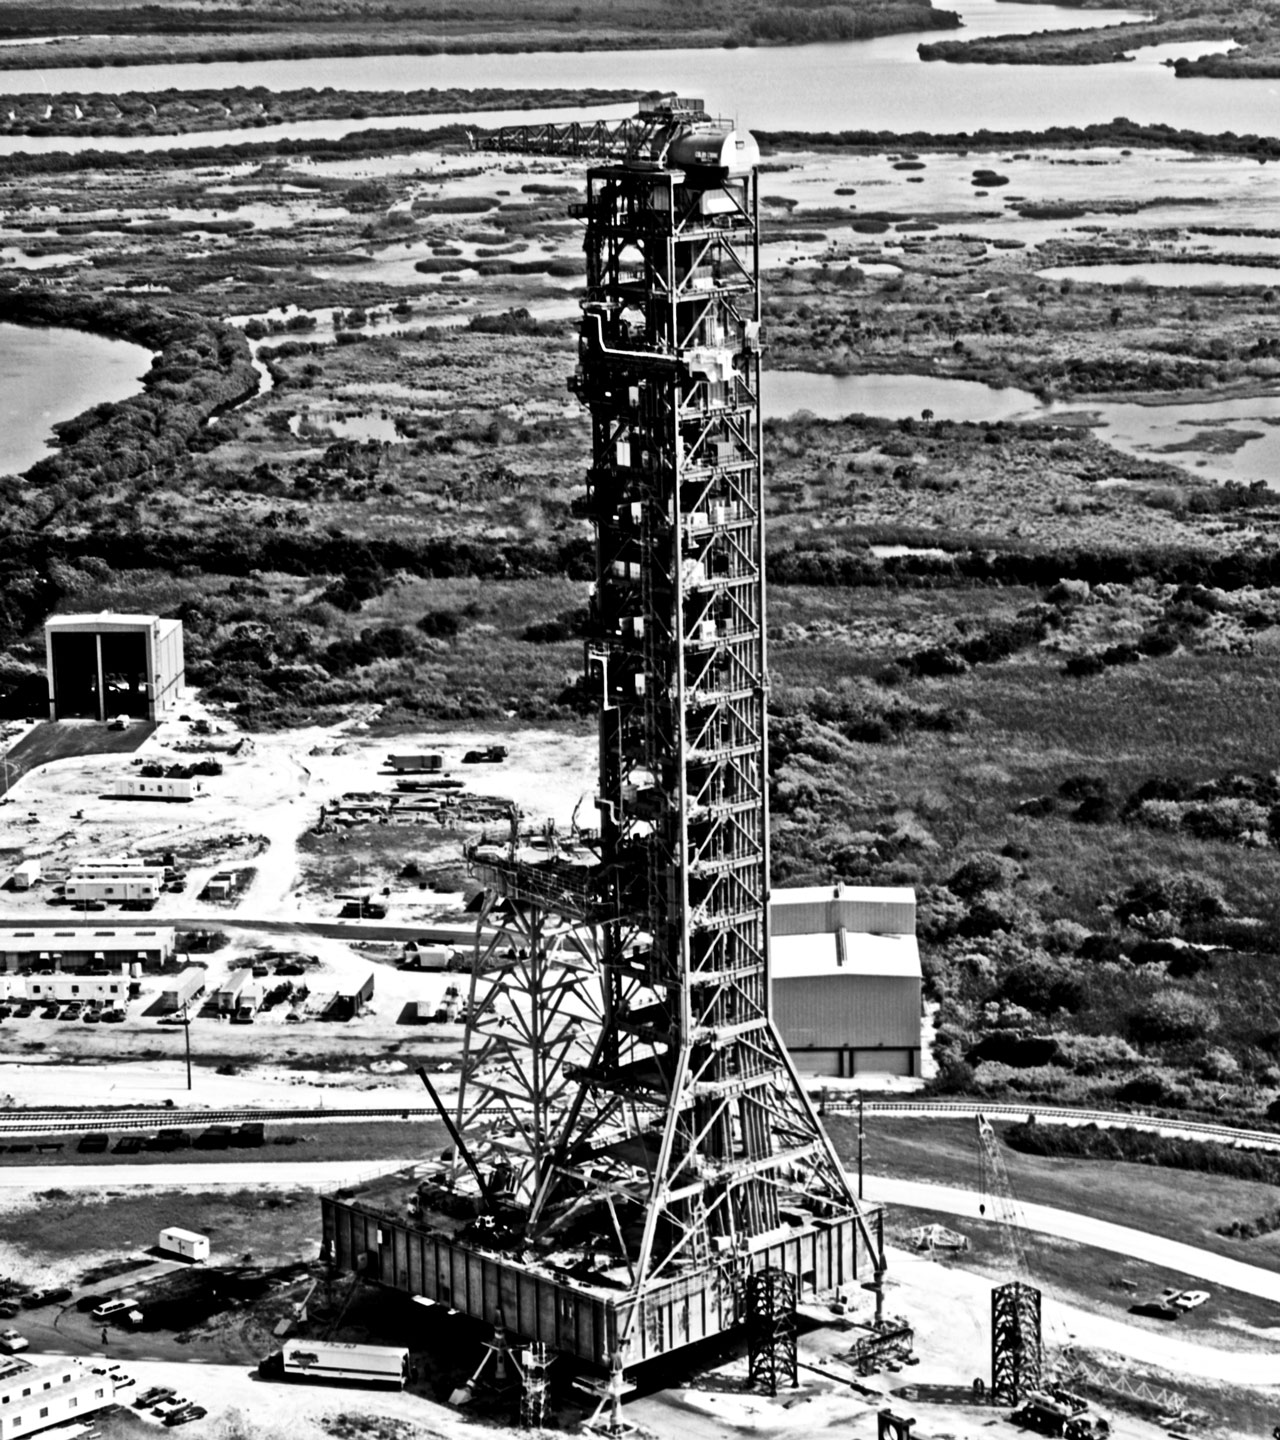 2. AERIAL VIEW SHOWING SIDES 3 AND 4 OF MOBILE LAUNCHER. - Mobile Launcher One, Kennedy Space Center, Titusville, Brevard County, FL